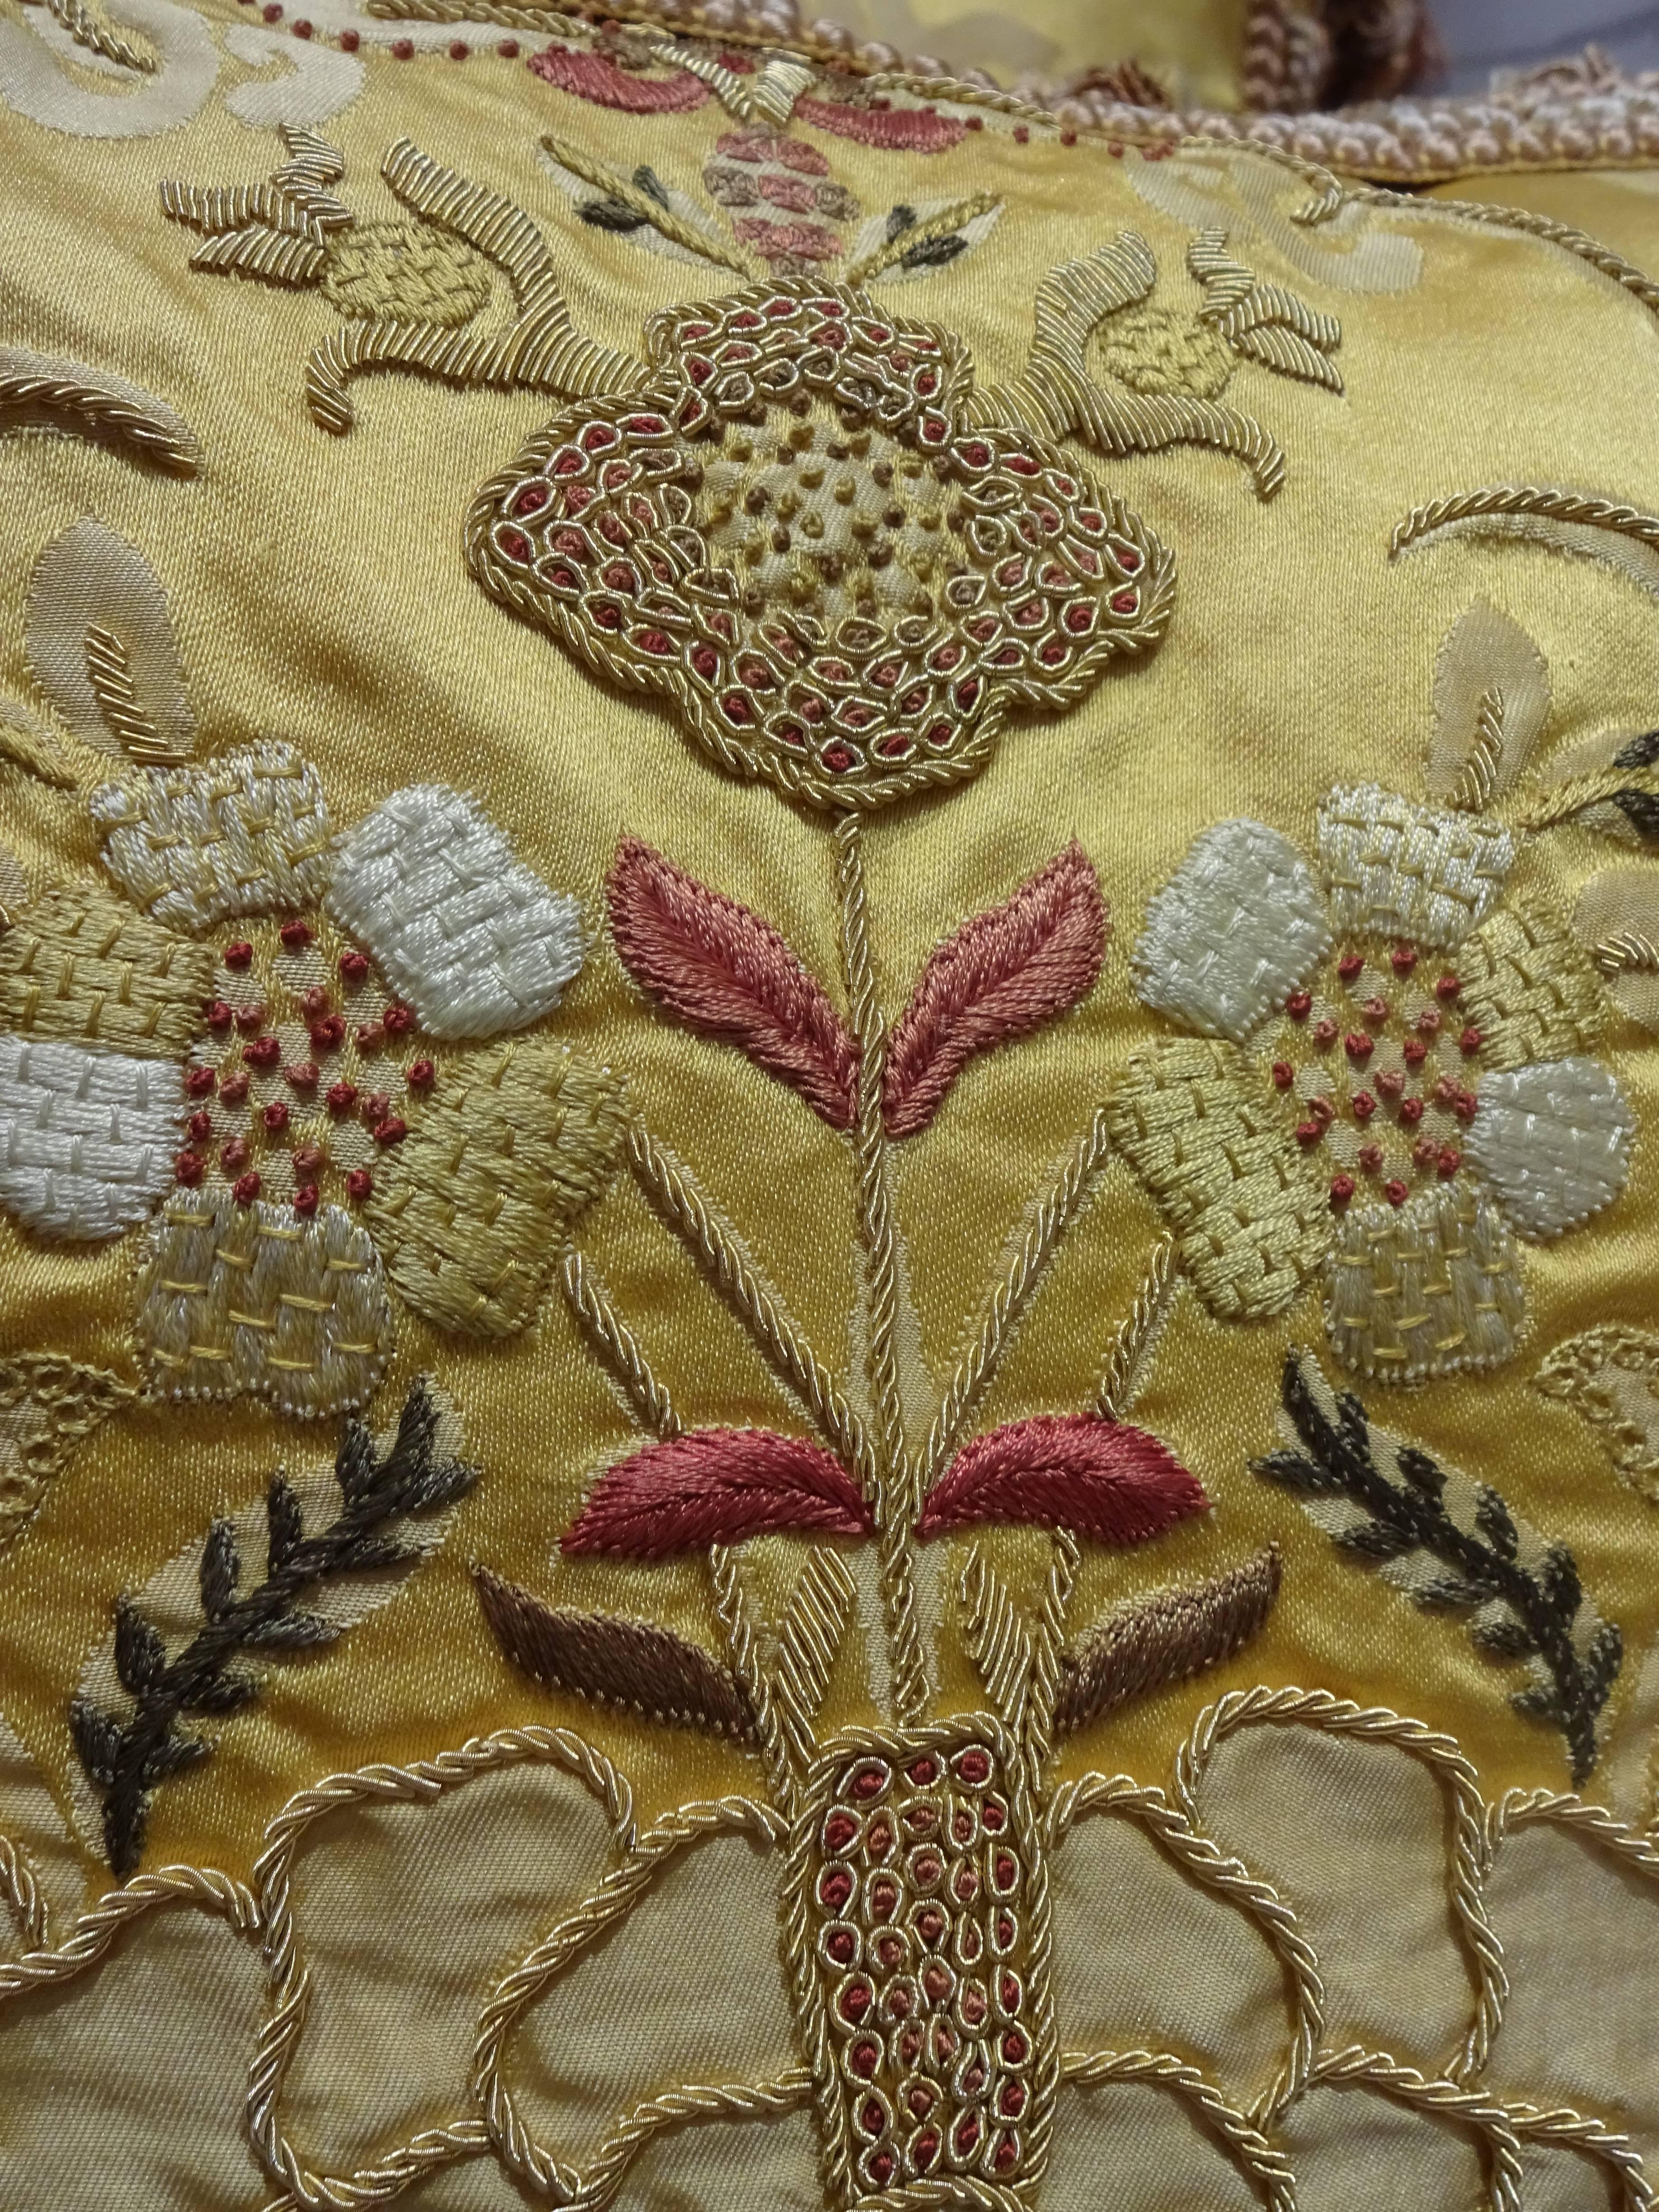 20th Century Exquisite Embroidered Pillow, Scalamandre Fabric For Sale